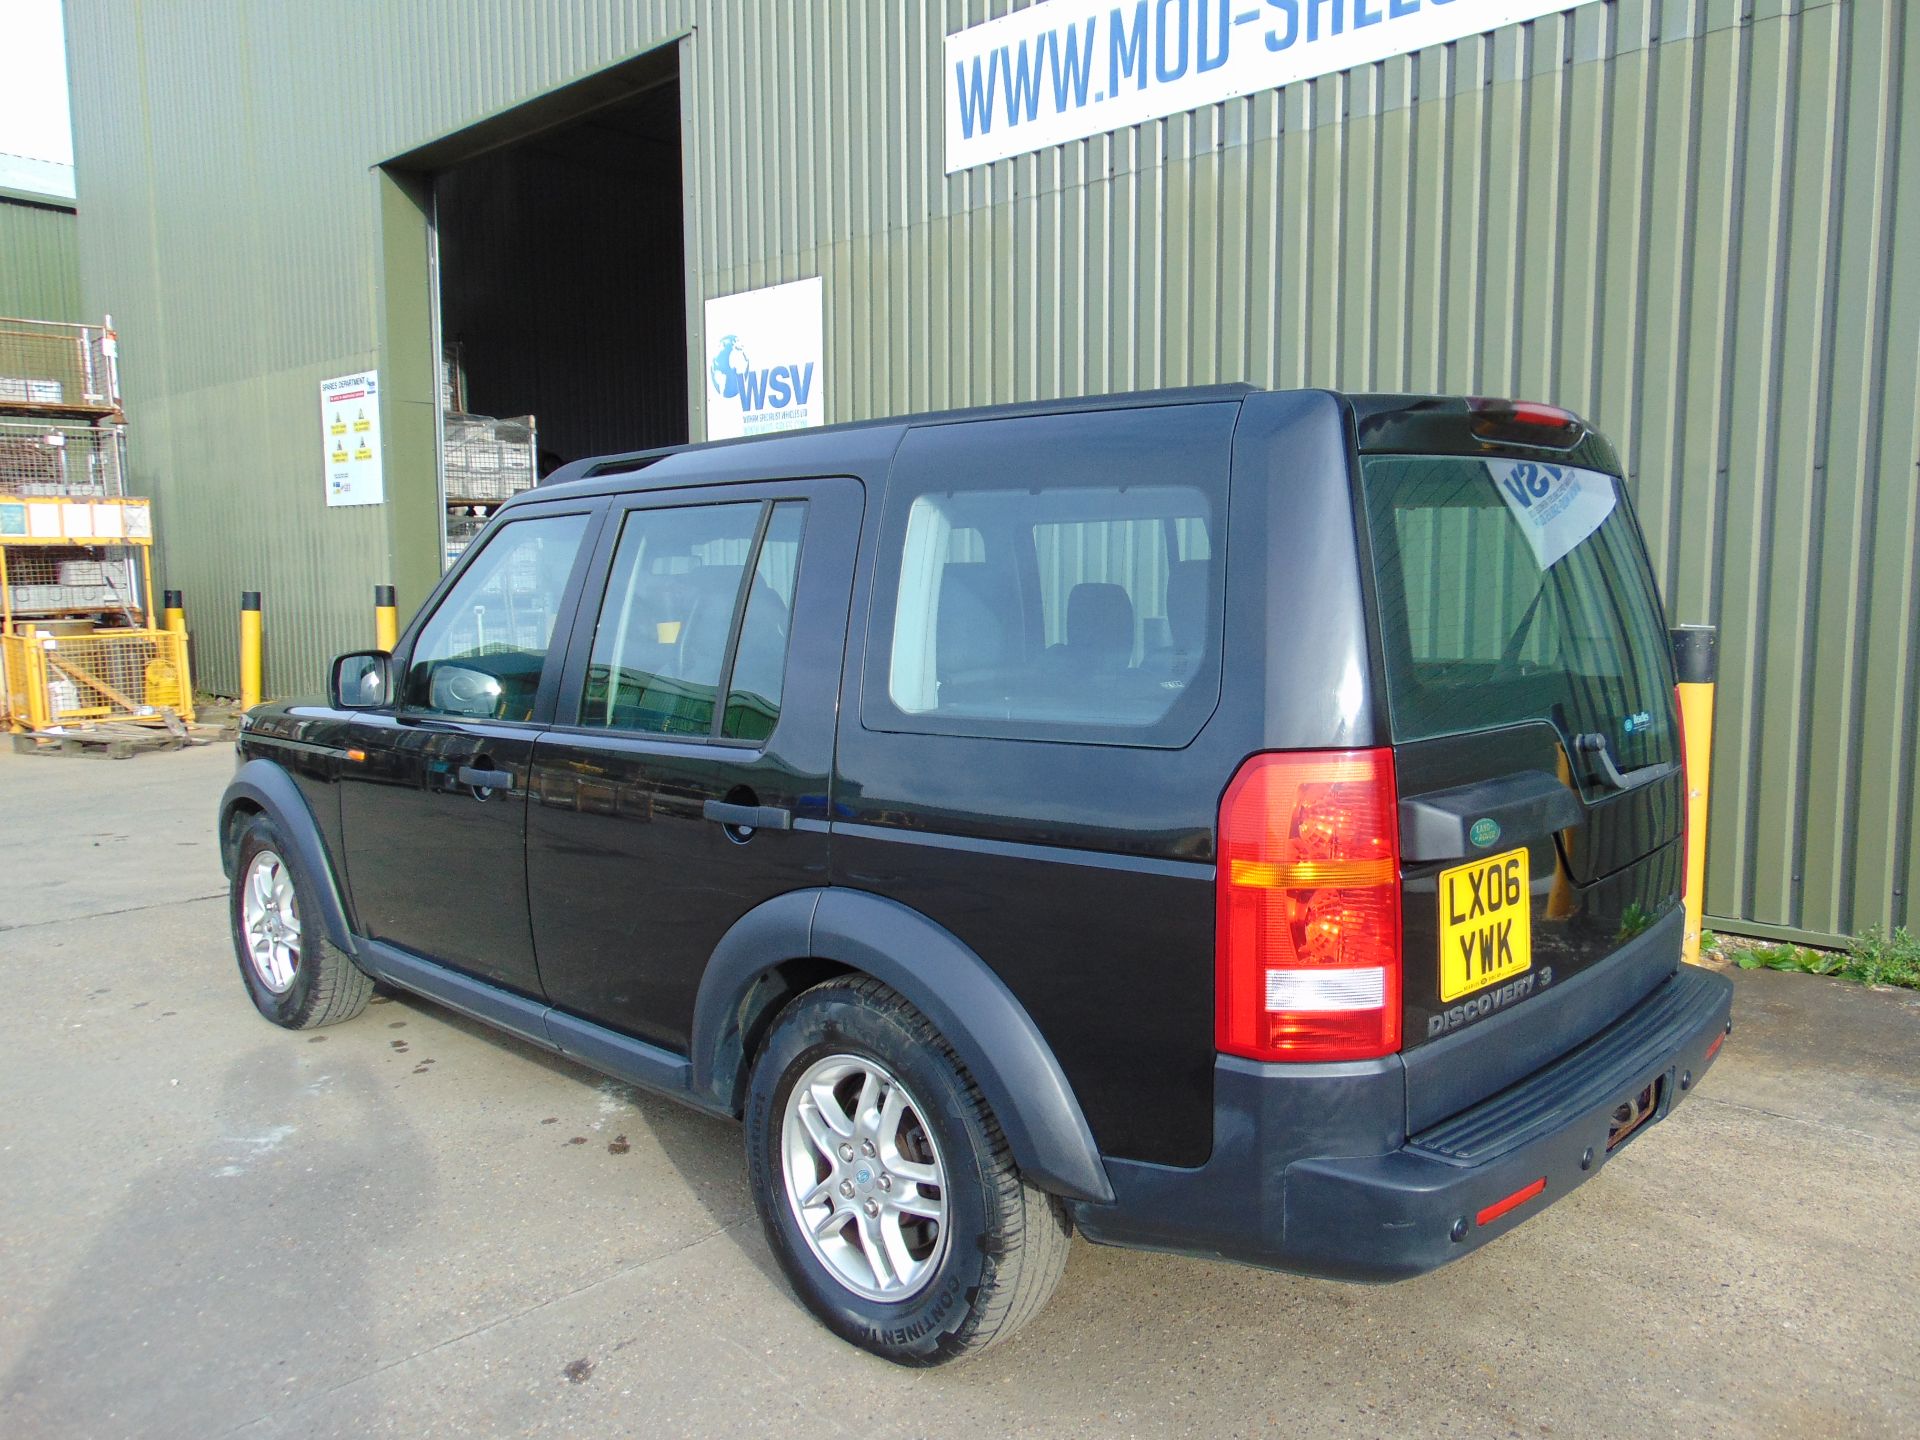 2006 Land Rover Discovery 3 TDV6 2.7 Ltr Auto - 4WD - 5 dr 7 Seater - Black - Image 3 of 49